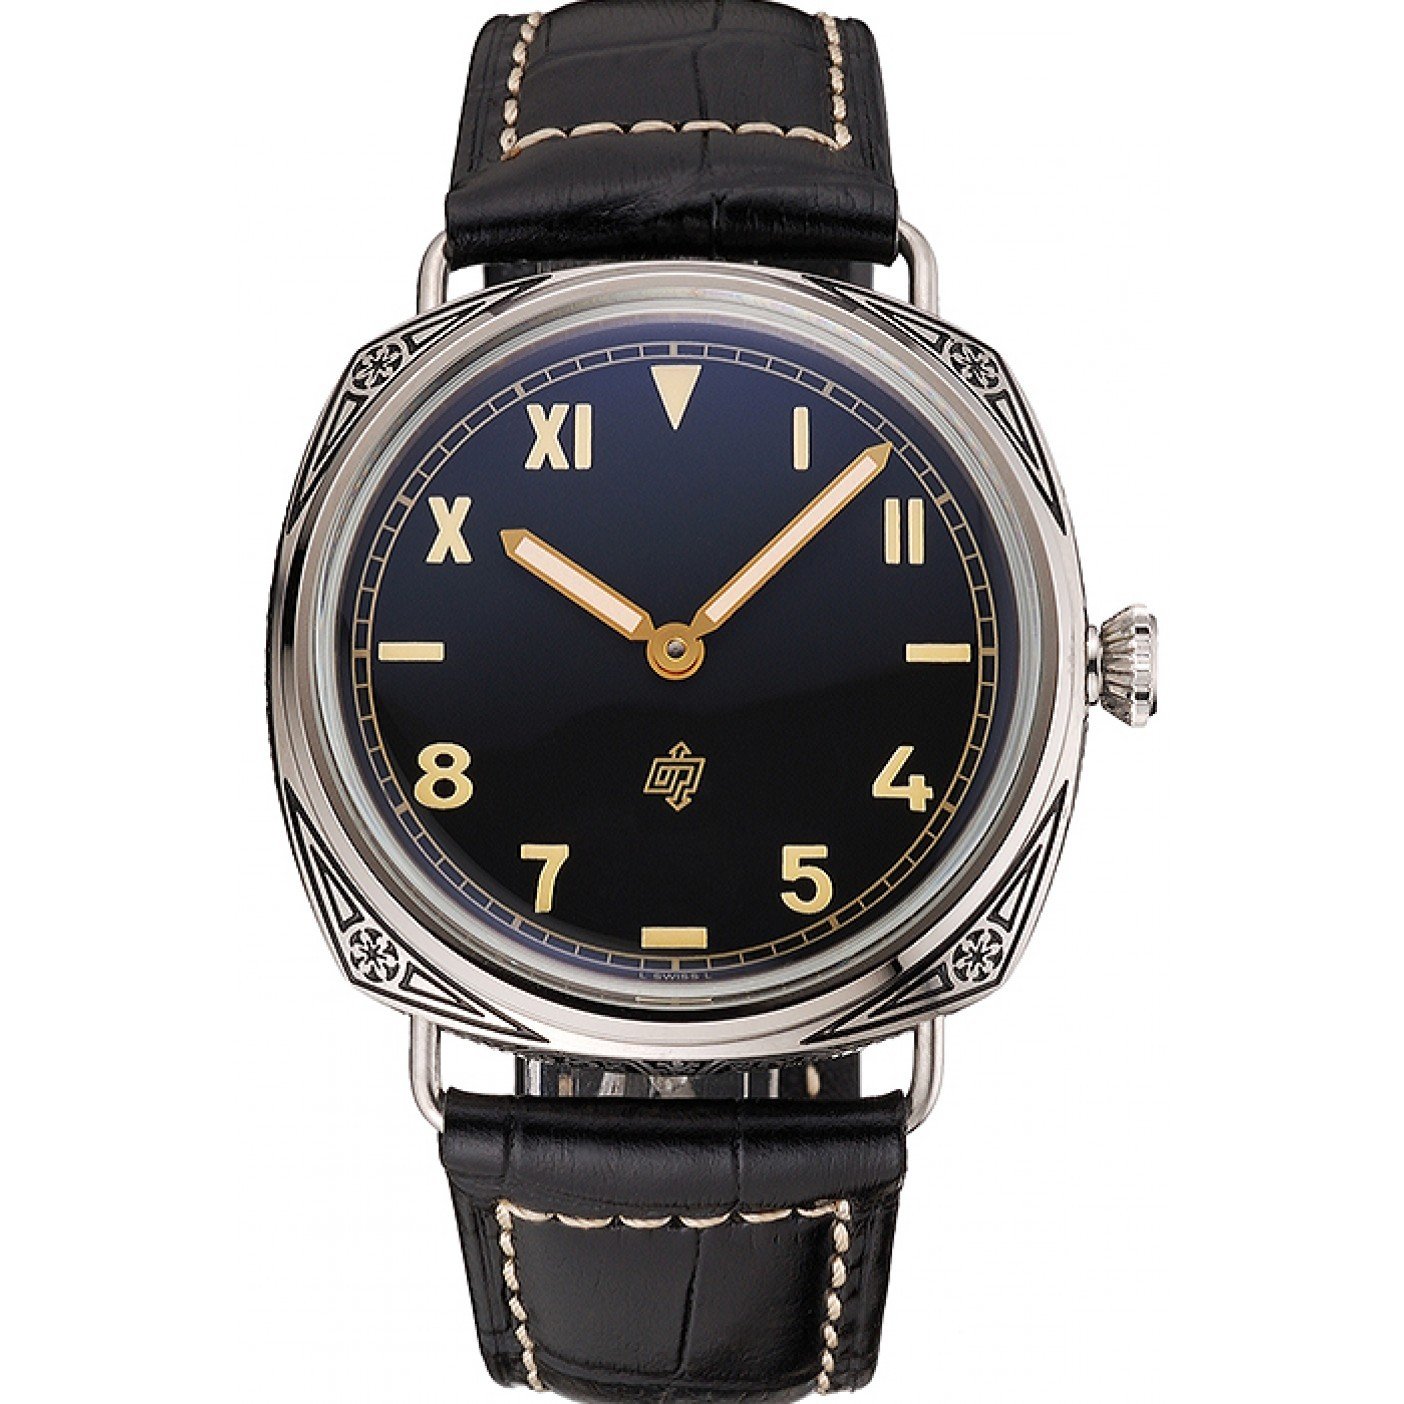 Panerai Radiomir Firenze PAM604 Black Dial Roman Numerals Engraved Stainless Steel Case Black Leather Strap